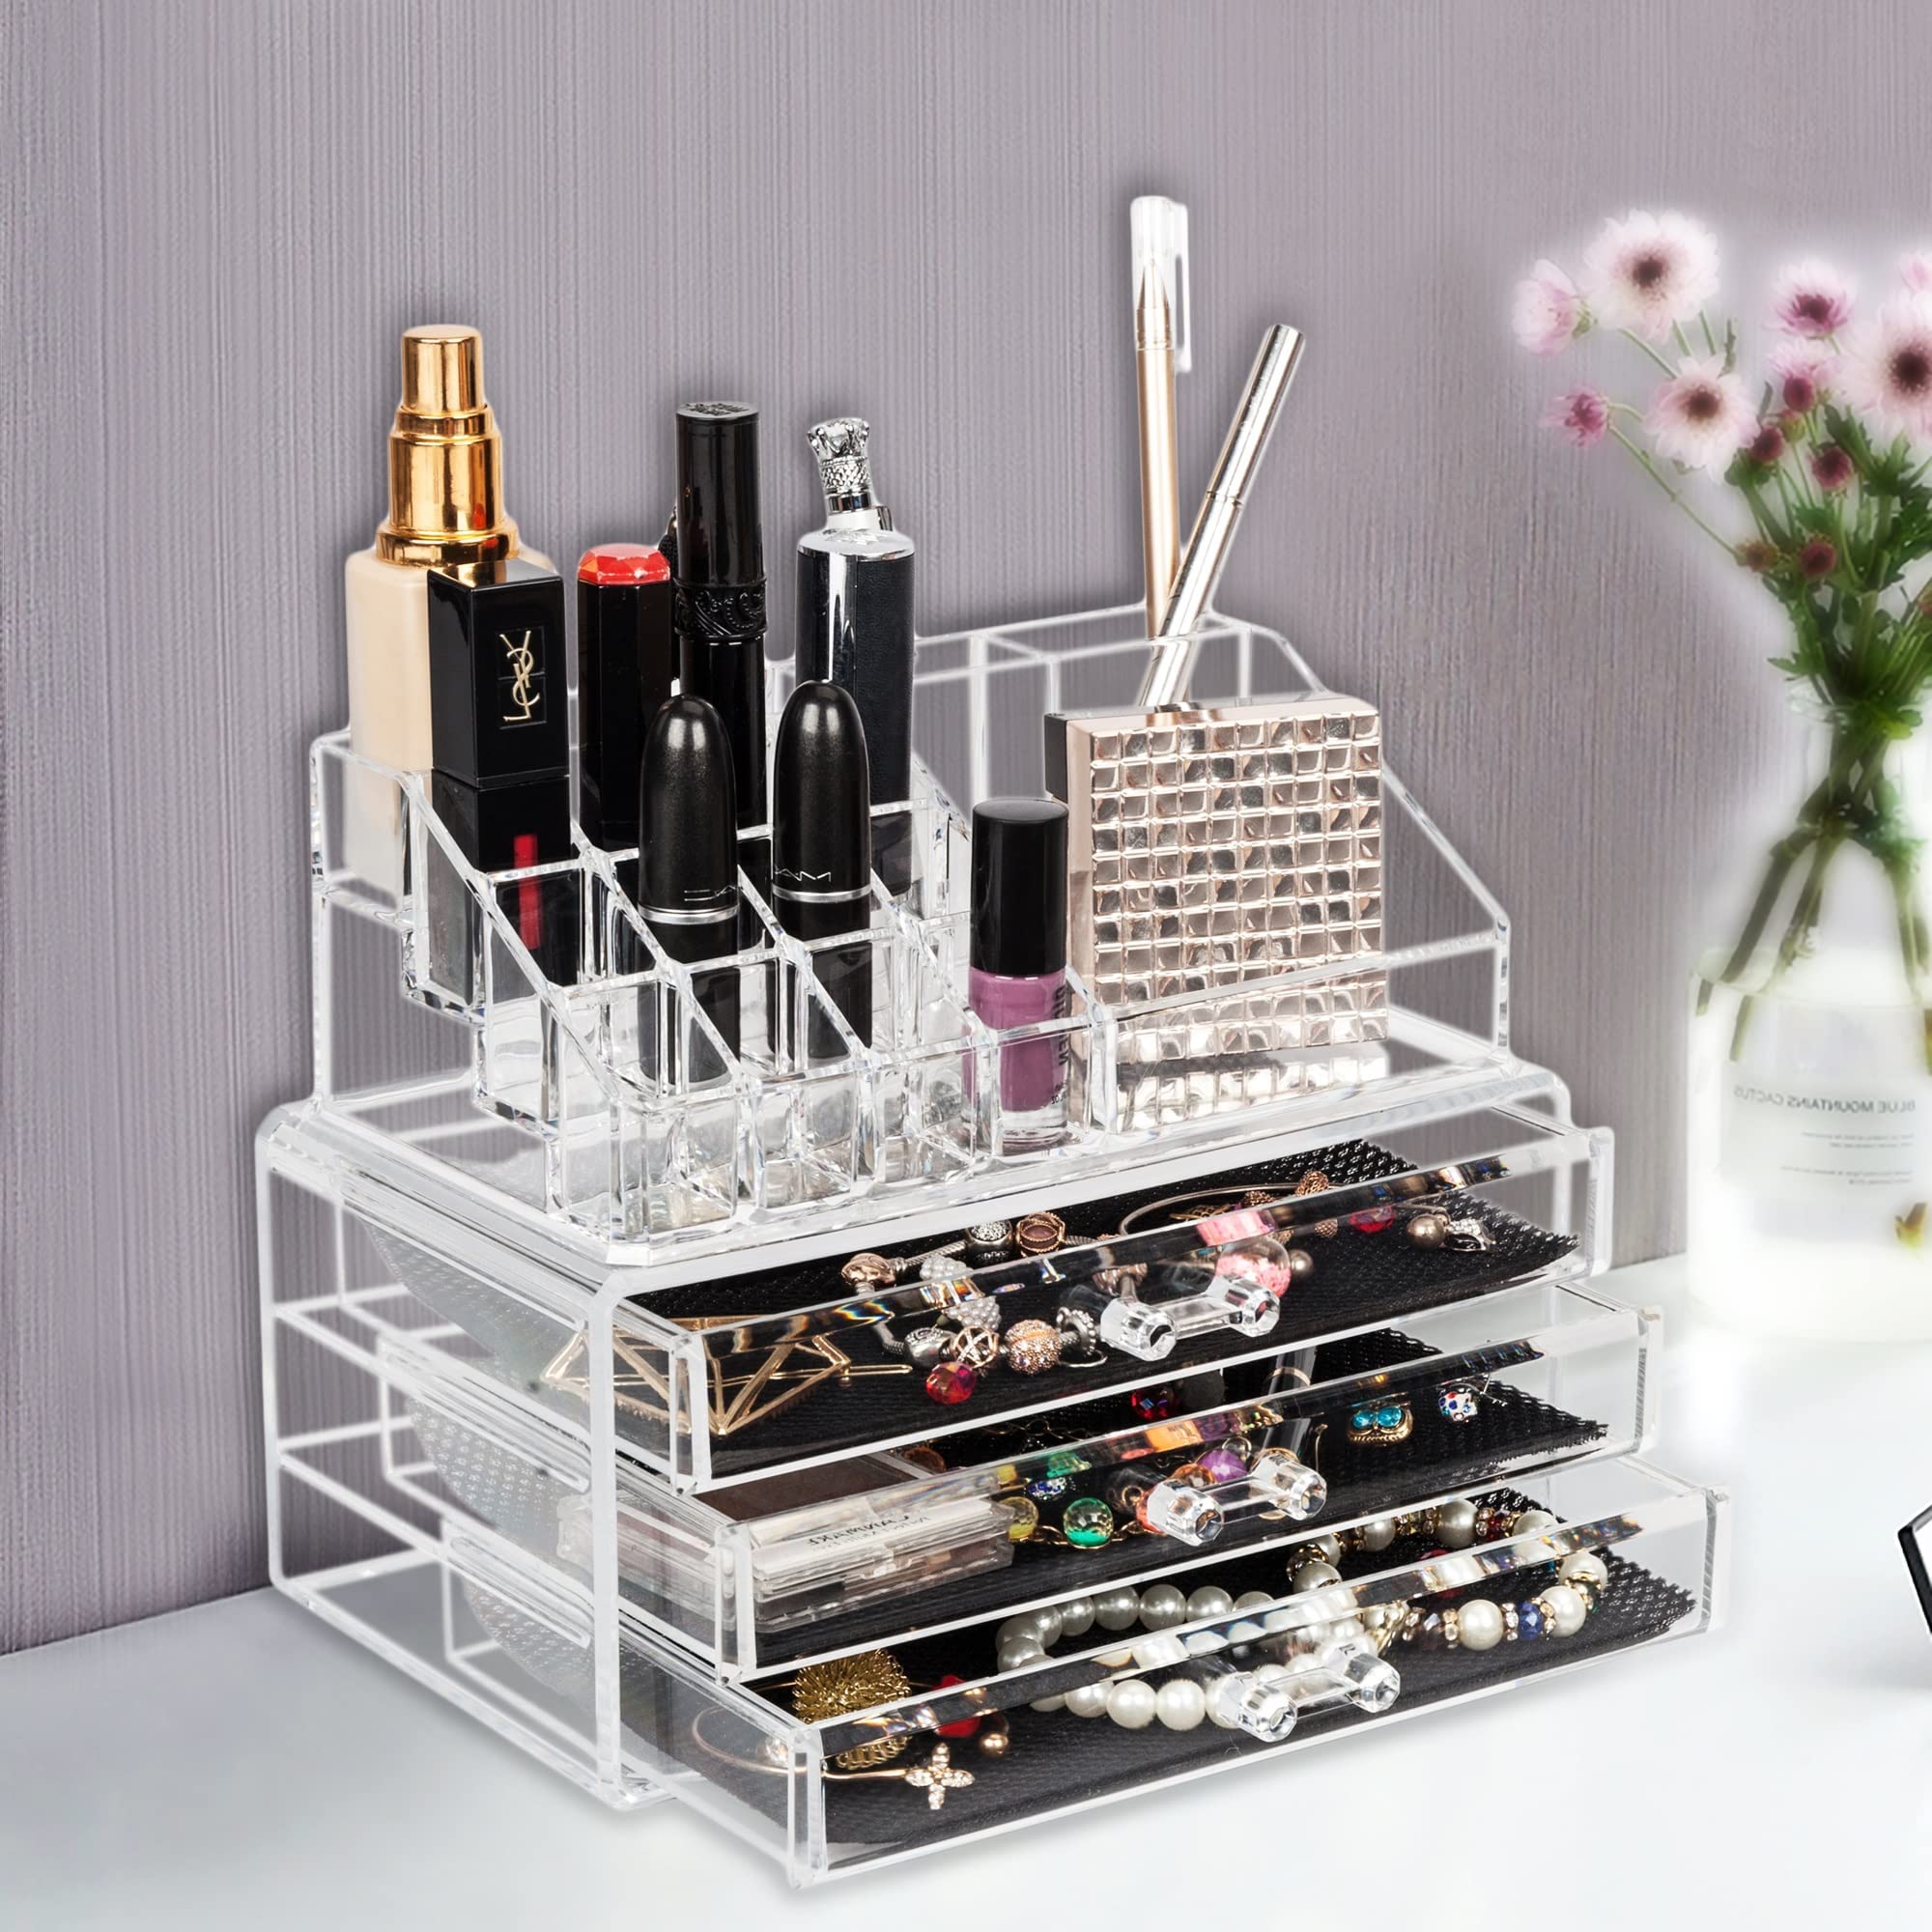 VIO 3 Drawers Cosmetic Storage Organizer Makeup Storage Stackable Cosmetic Organizer Drawers Jewelry Display Box Clear Large Cosmetics Case for Bathroom, Dresser, Vanity and Countertop